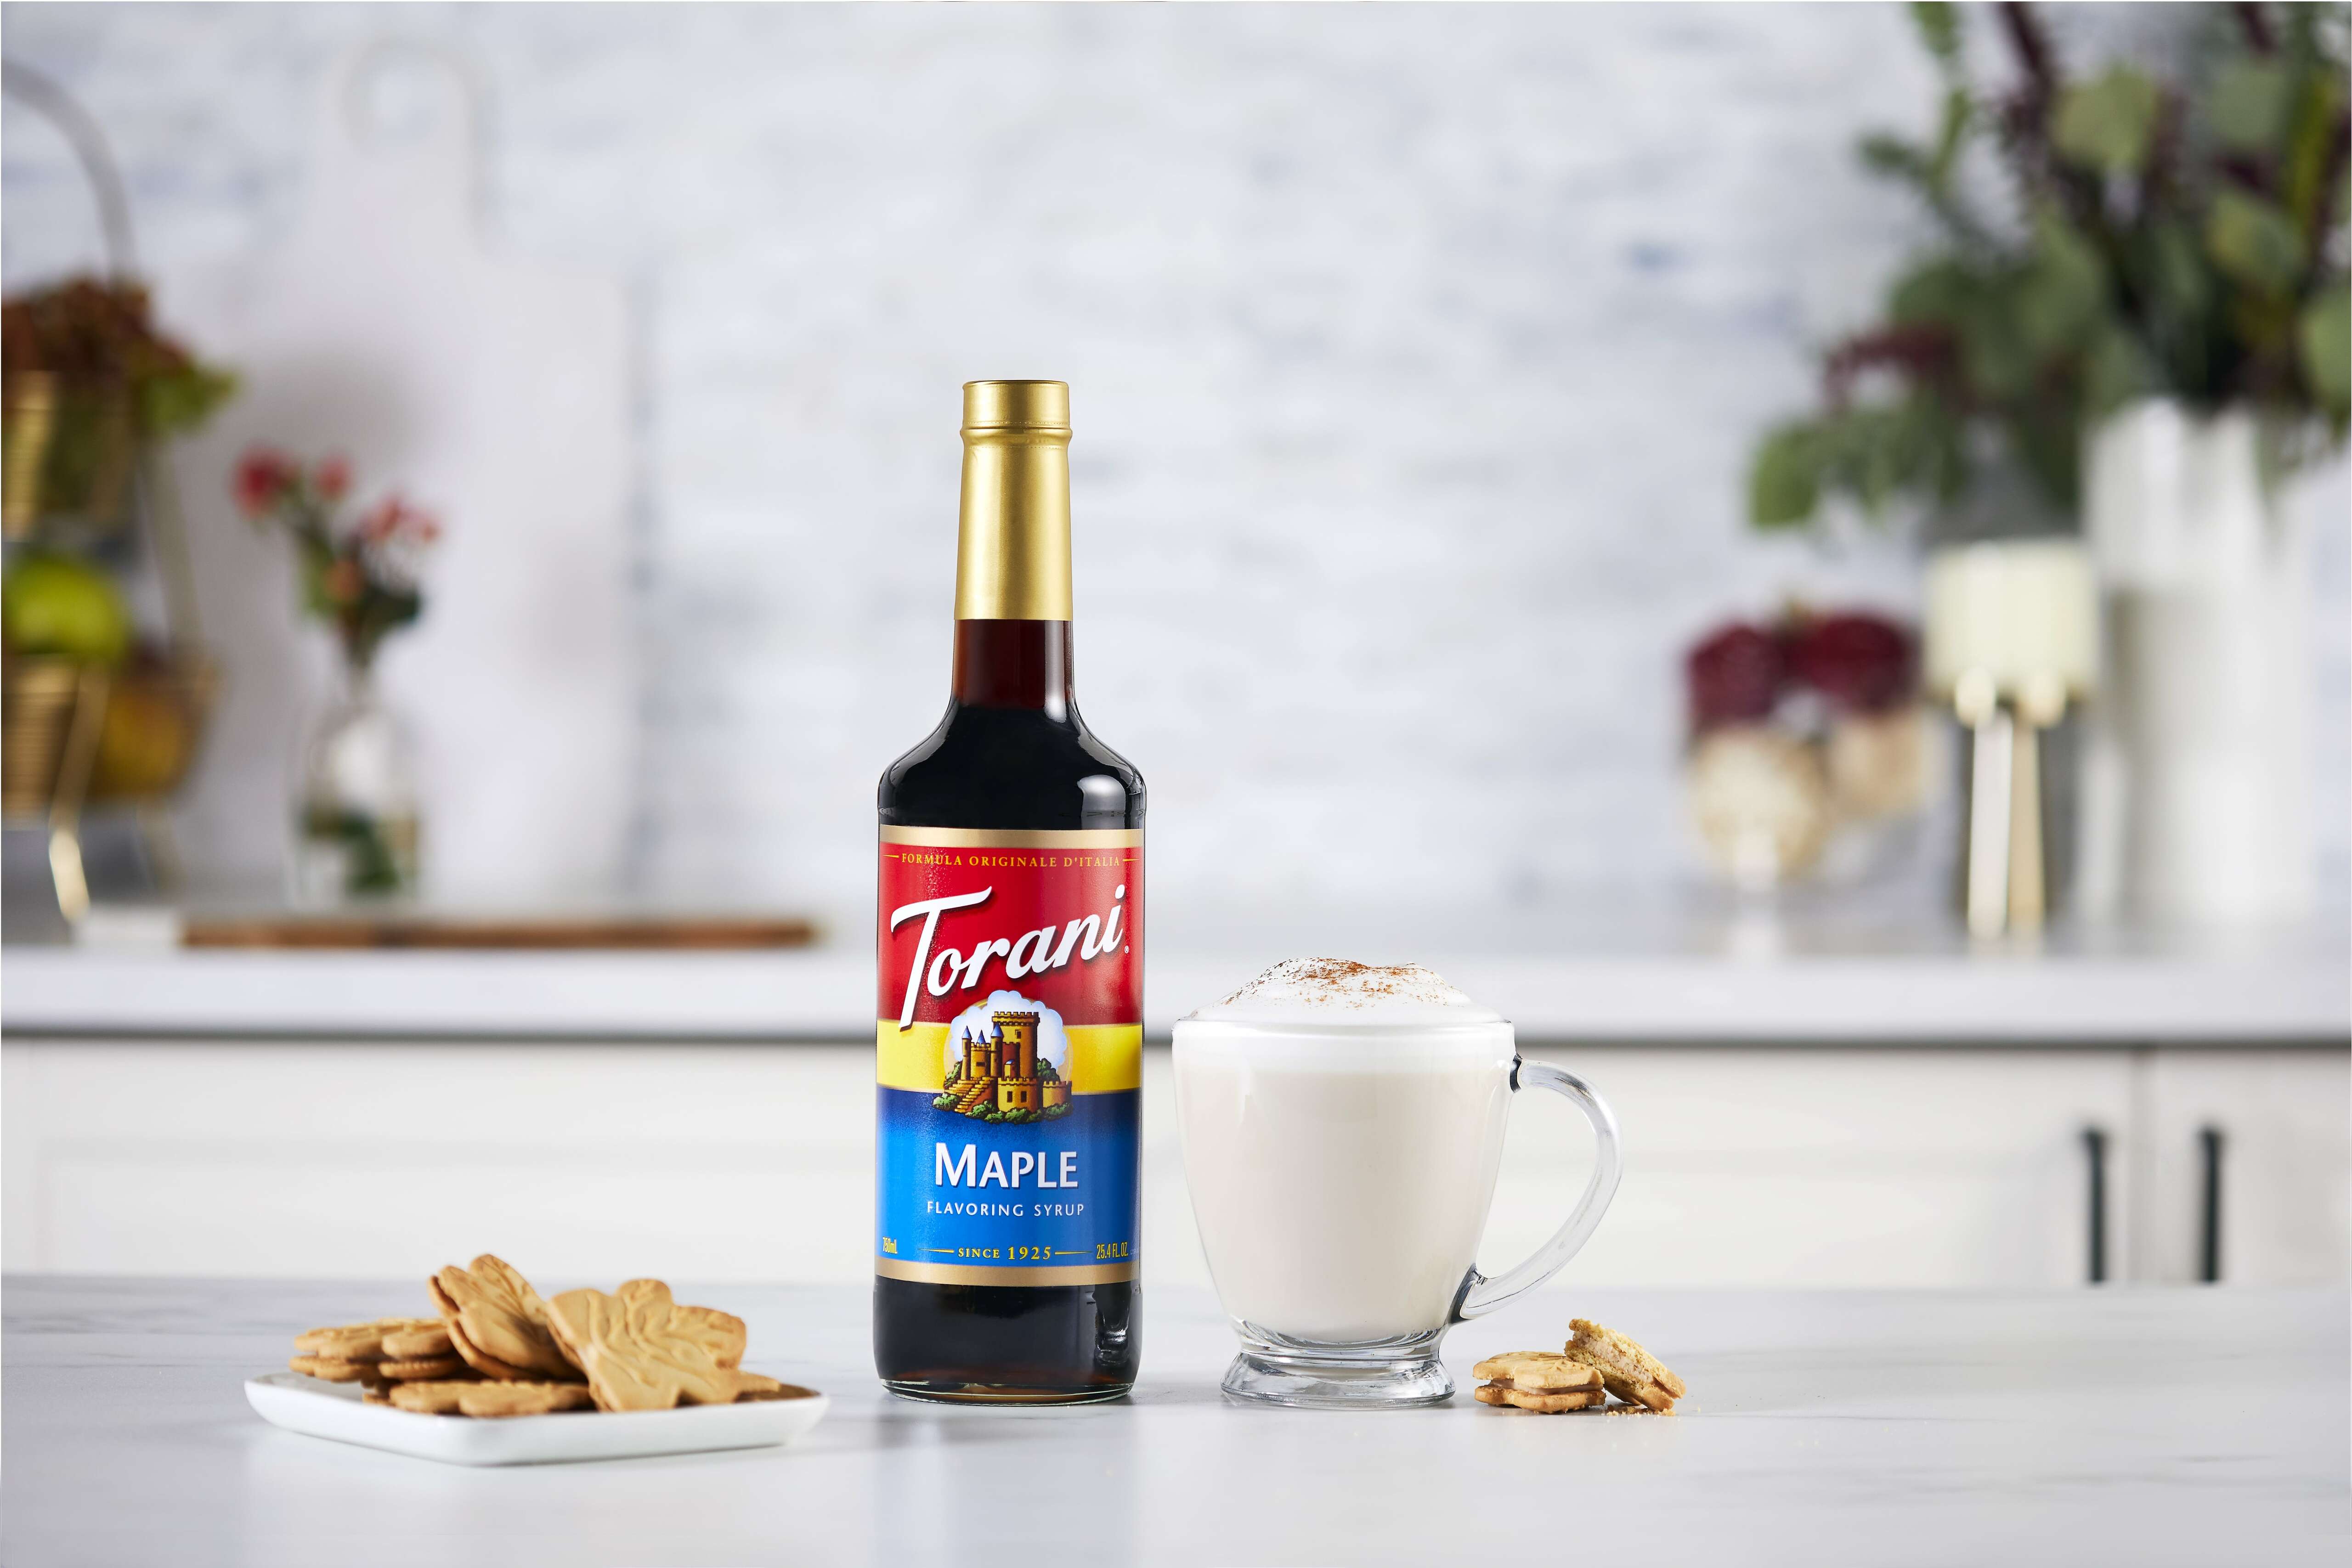 Torani Classic Flavored Syrups - 750 ml Glass Bottle: Maple Flavor